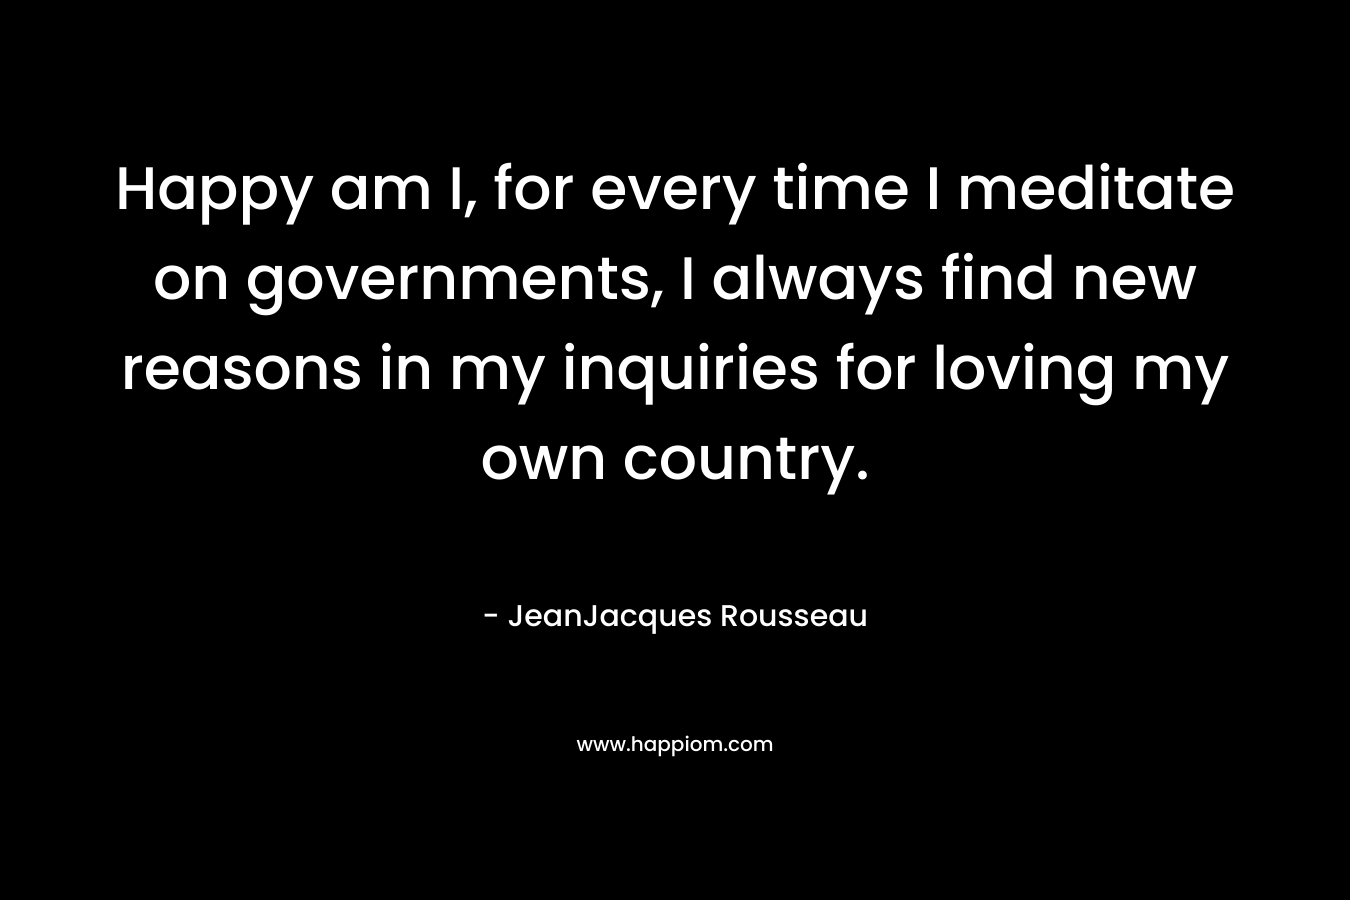 Happy am I, for every time I meditate on governments, I always find new reasons in my inquiries for loving my own country.